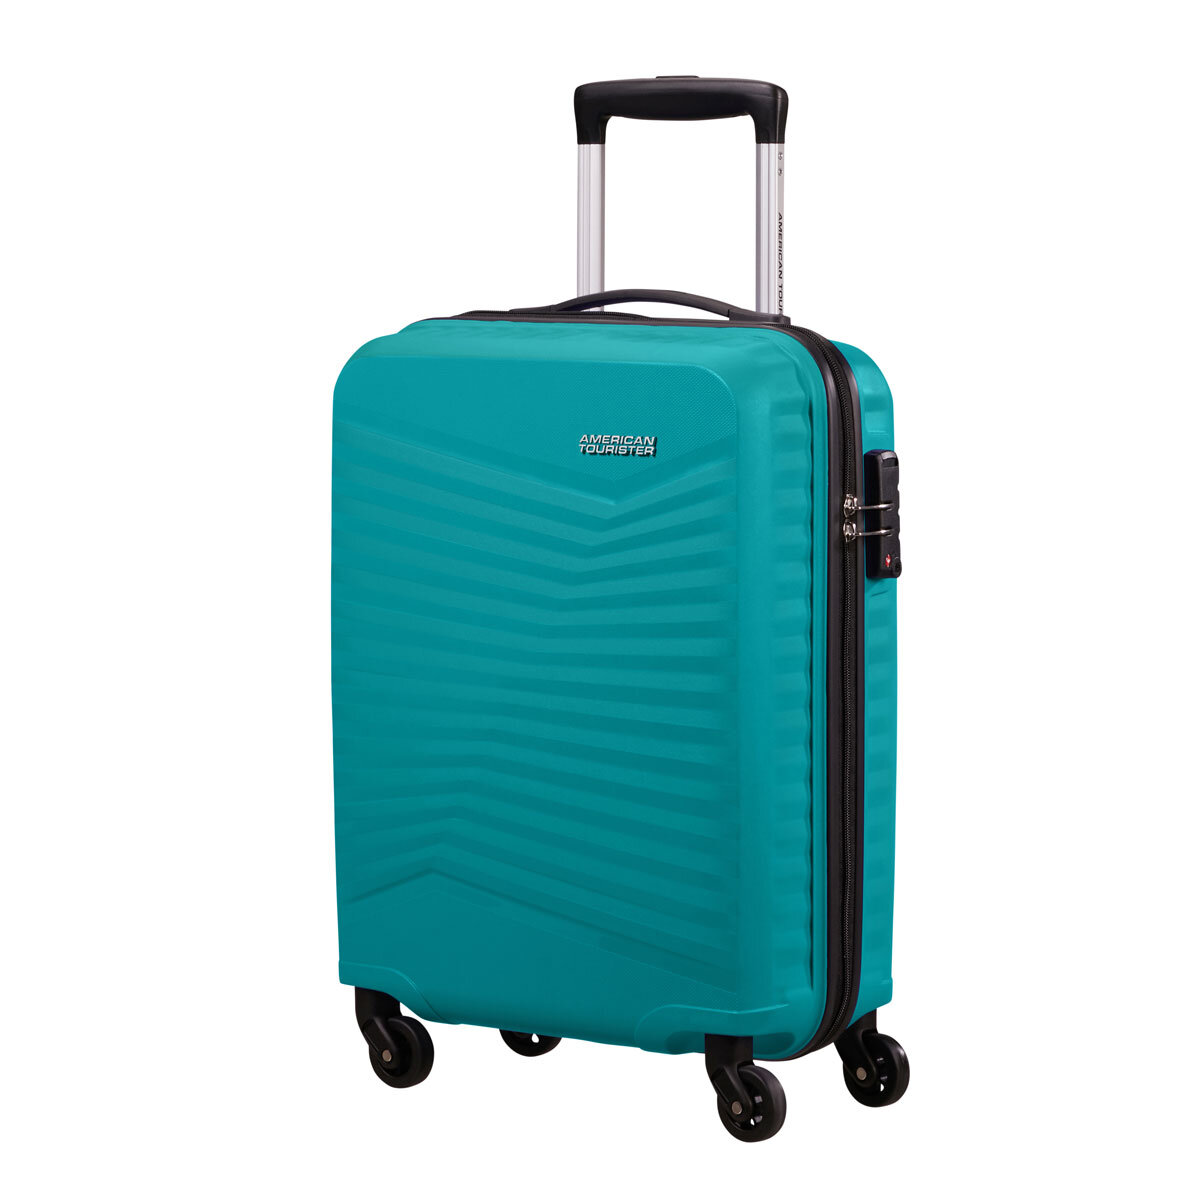 American Tourister Jet Driver 55cm Carry On Hardside Spinner Case in Turquoise